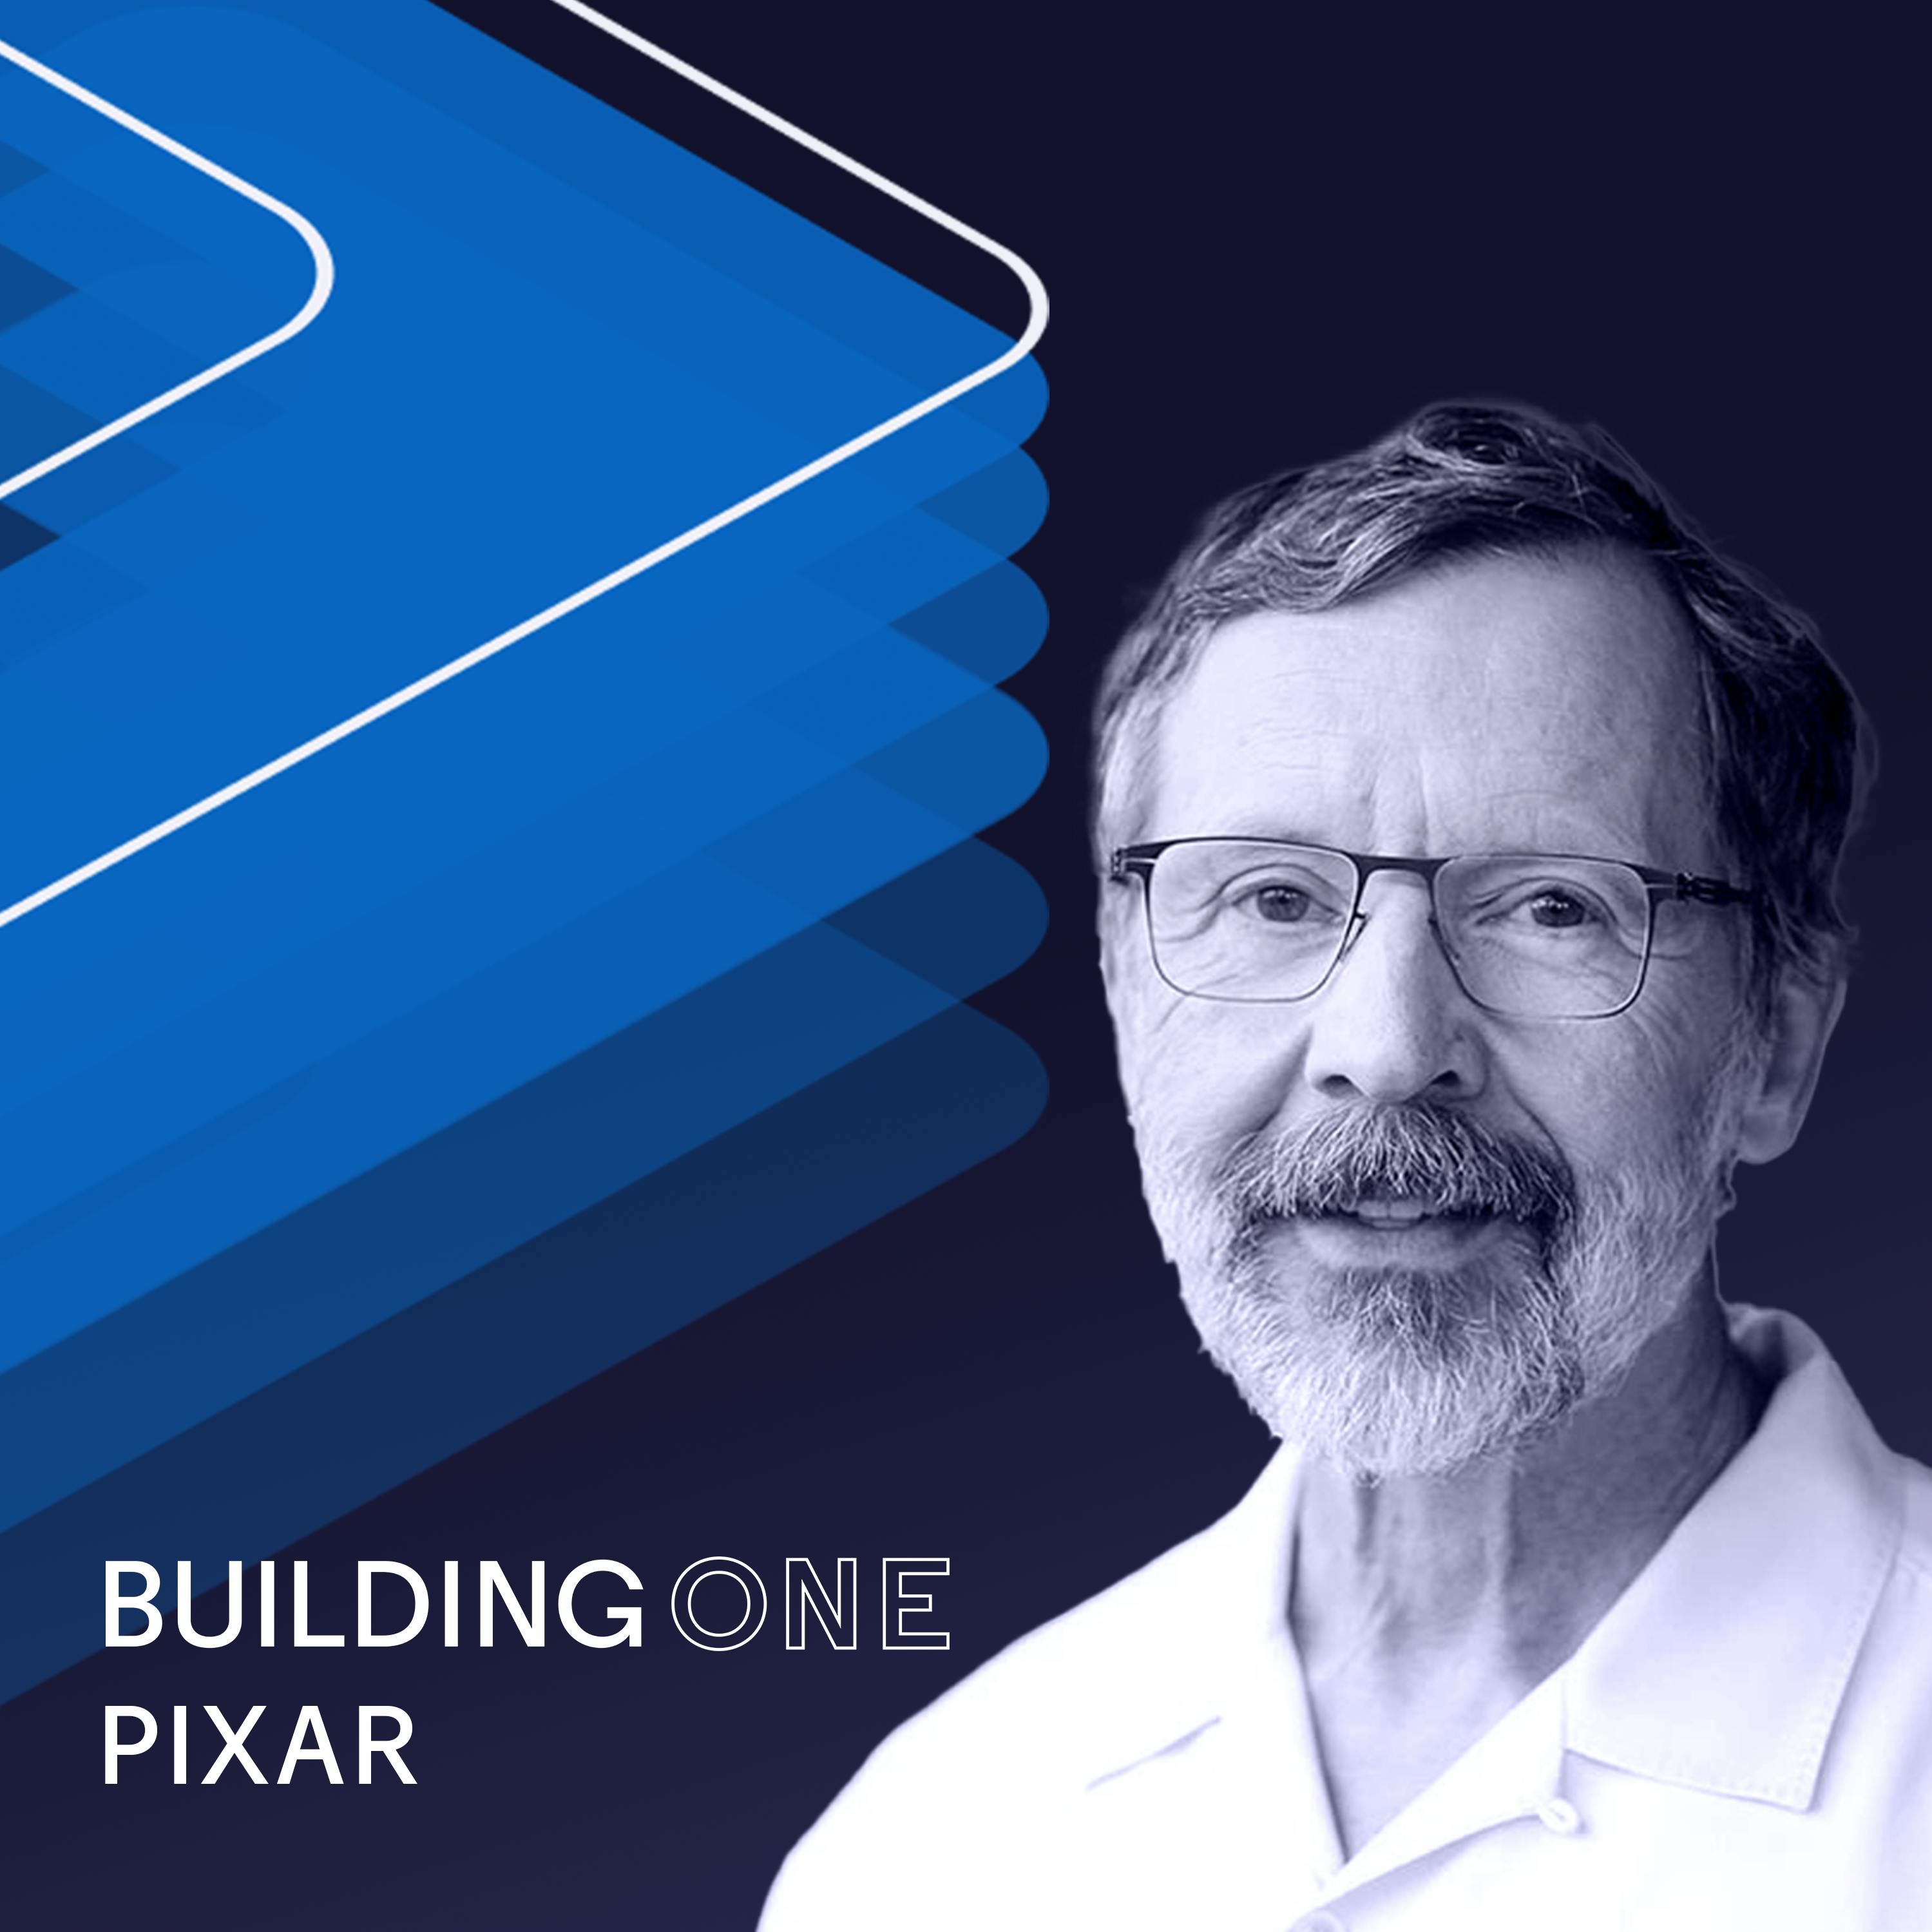 4 More Questions with Ed Catmull